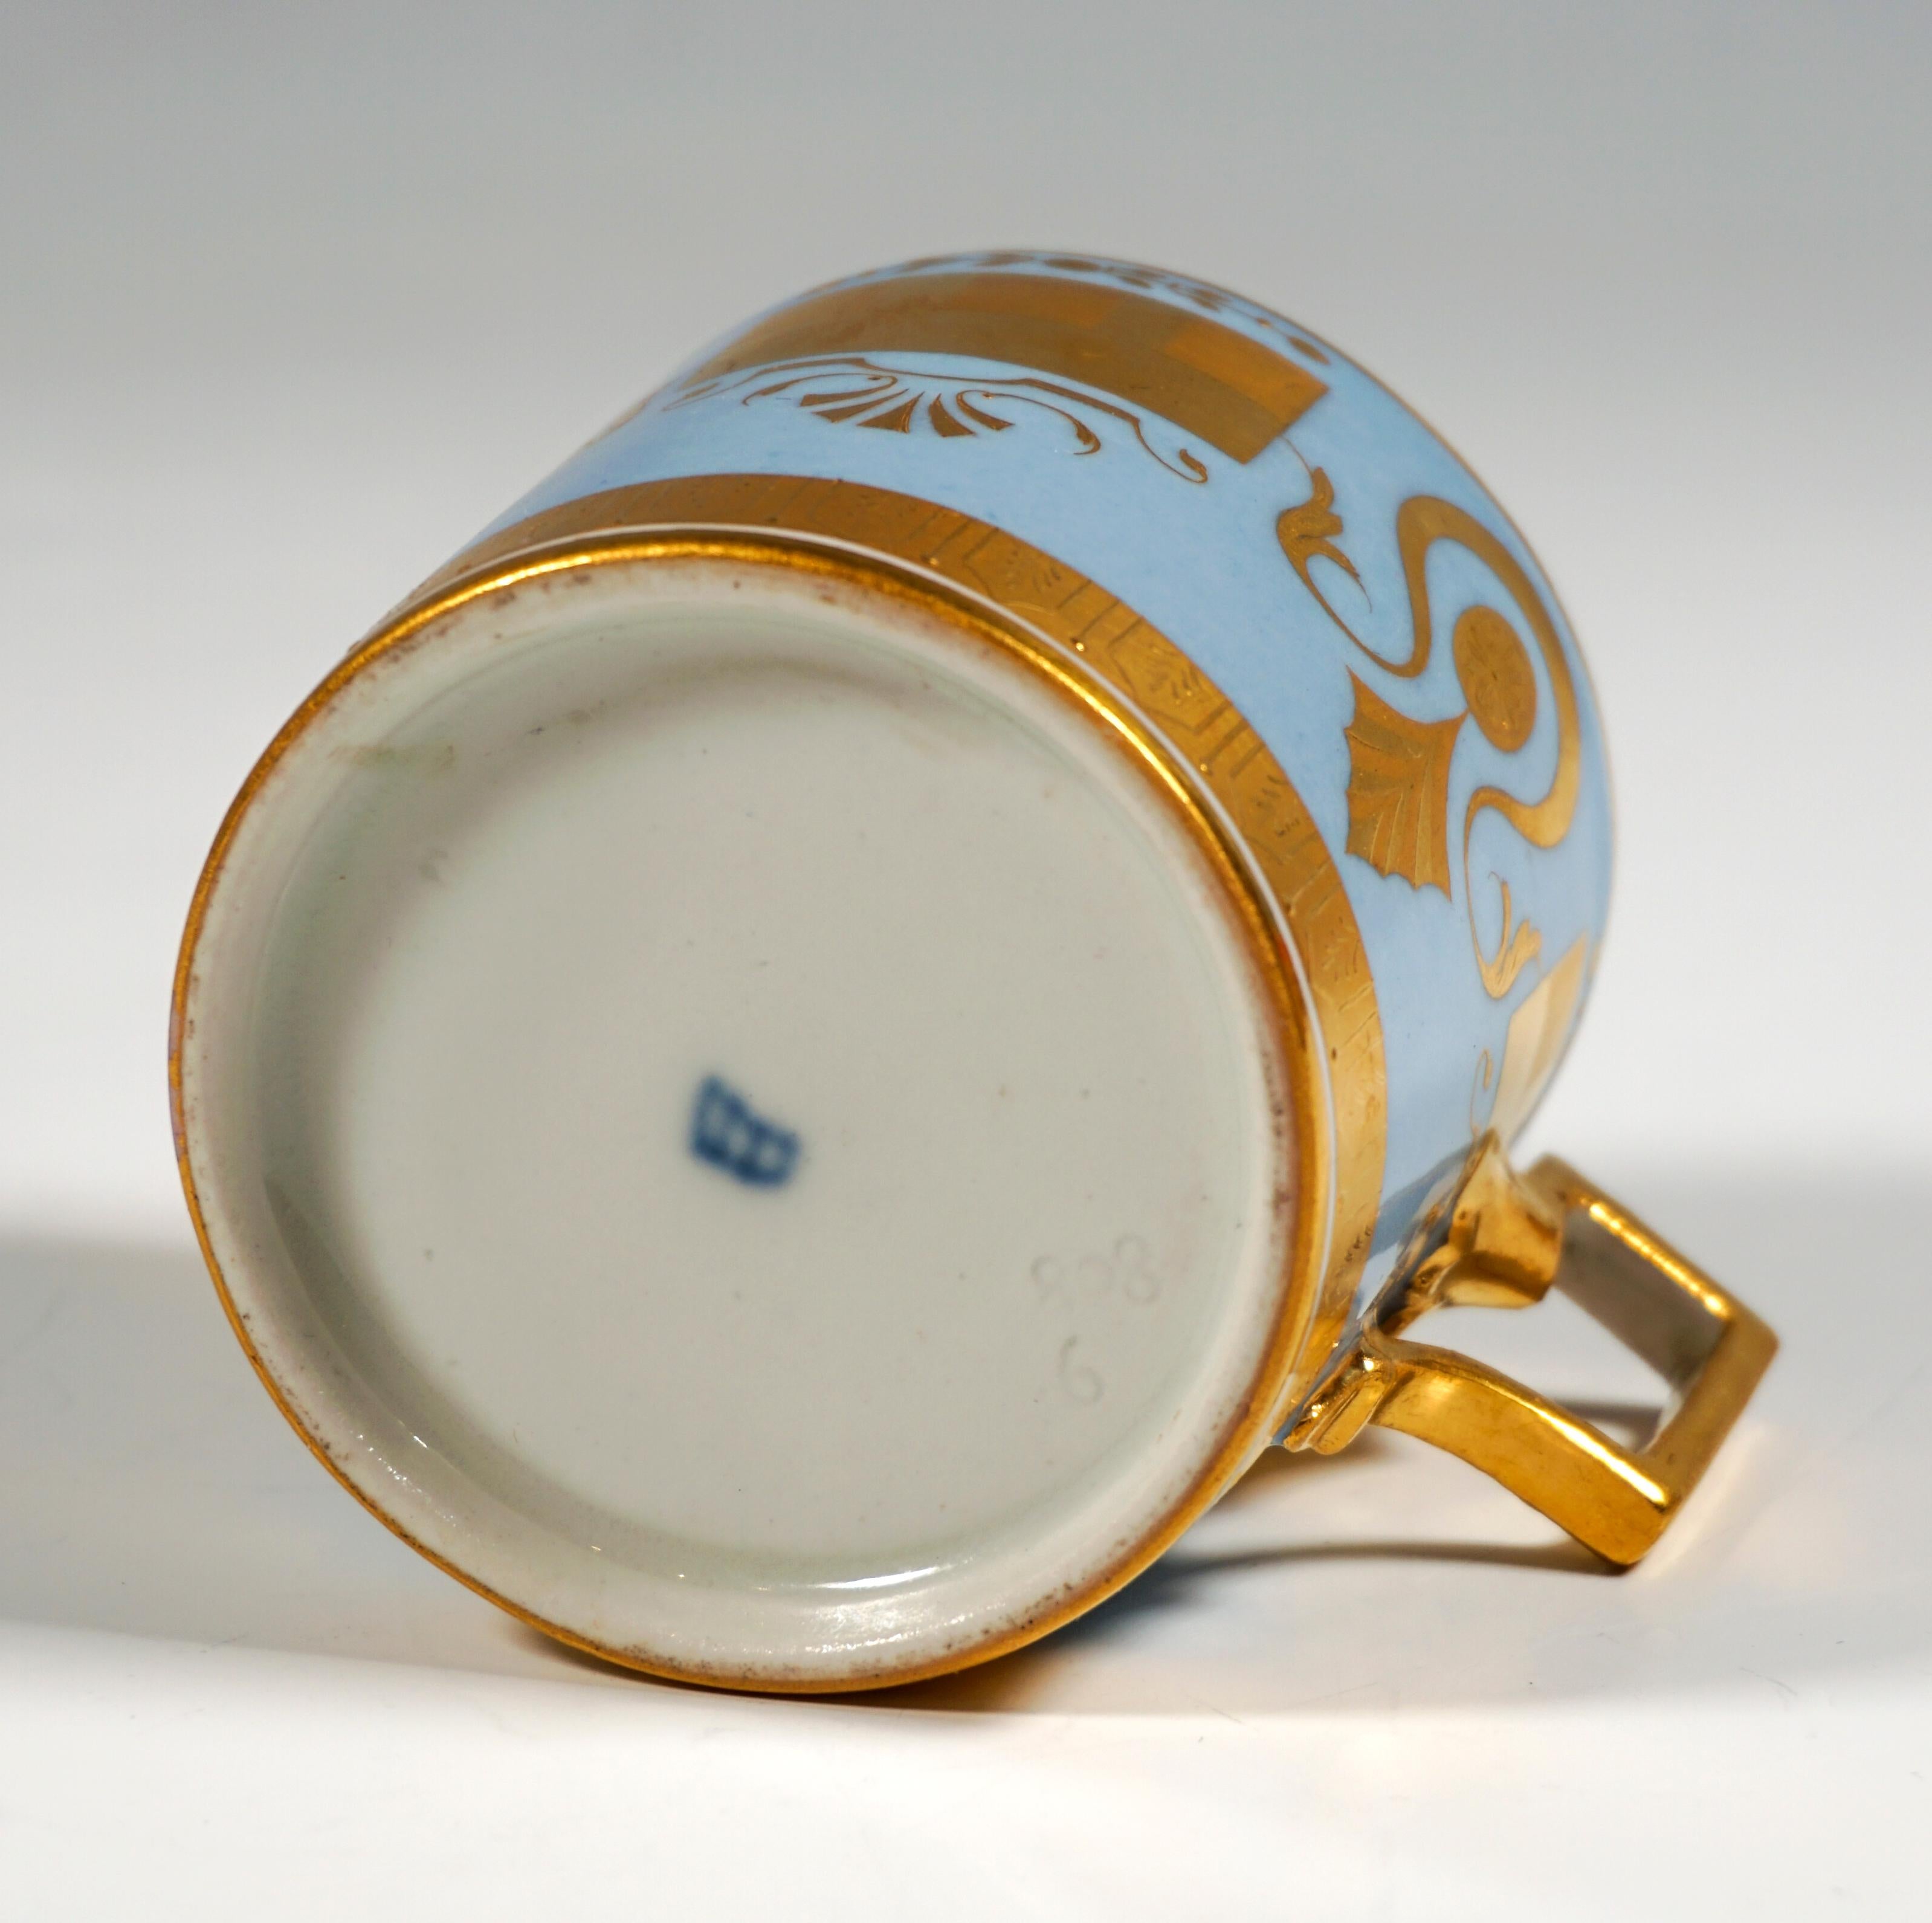 Vienna Imperial Empire Porcelain Collecting Cup, Sky Blue and Gold, 1808 1